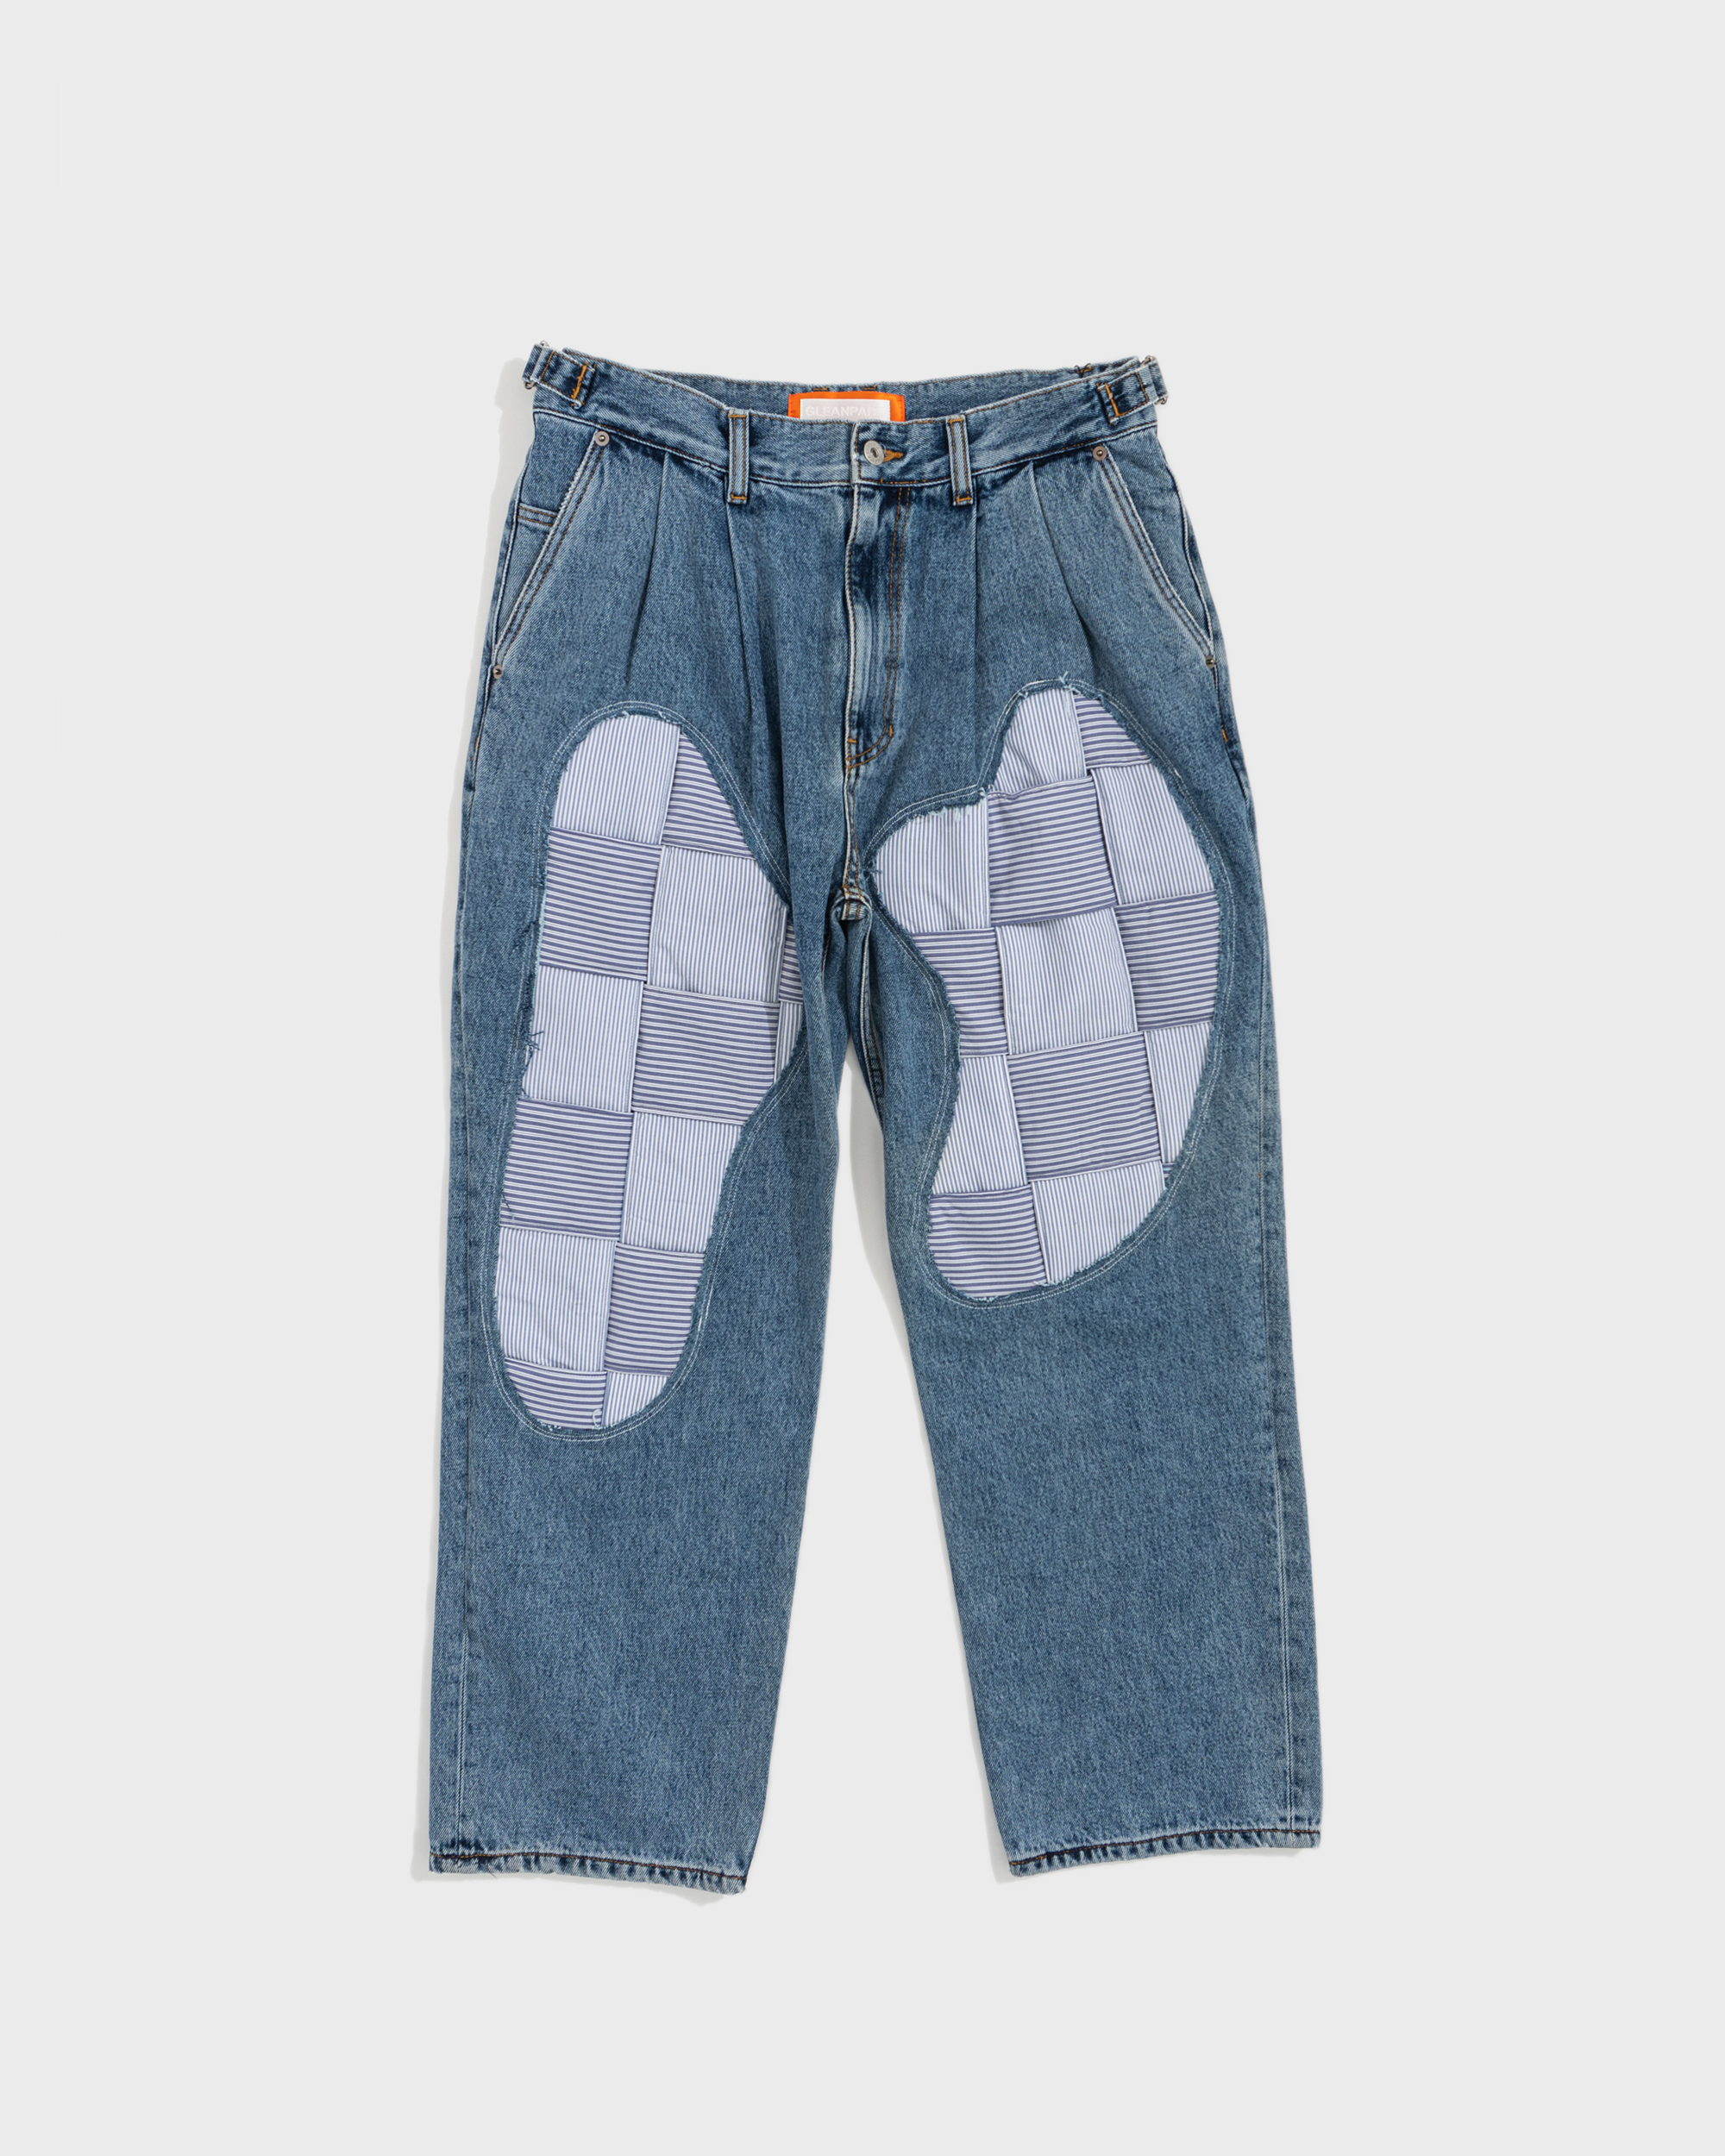 Weaving Patchwork Jeans